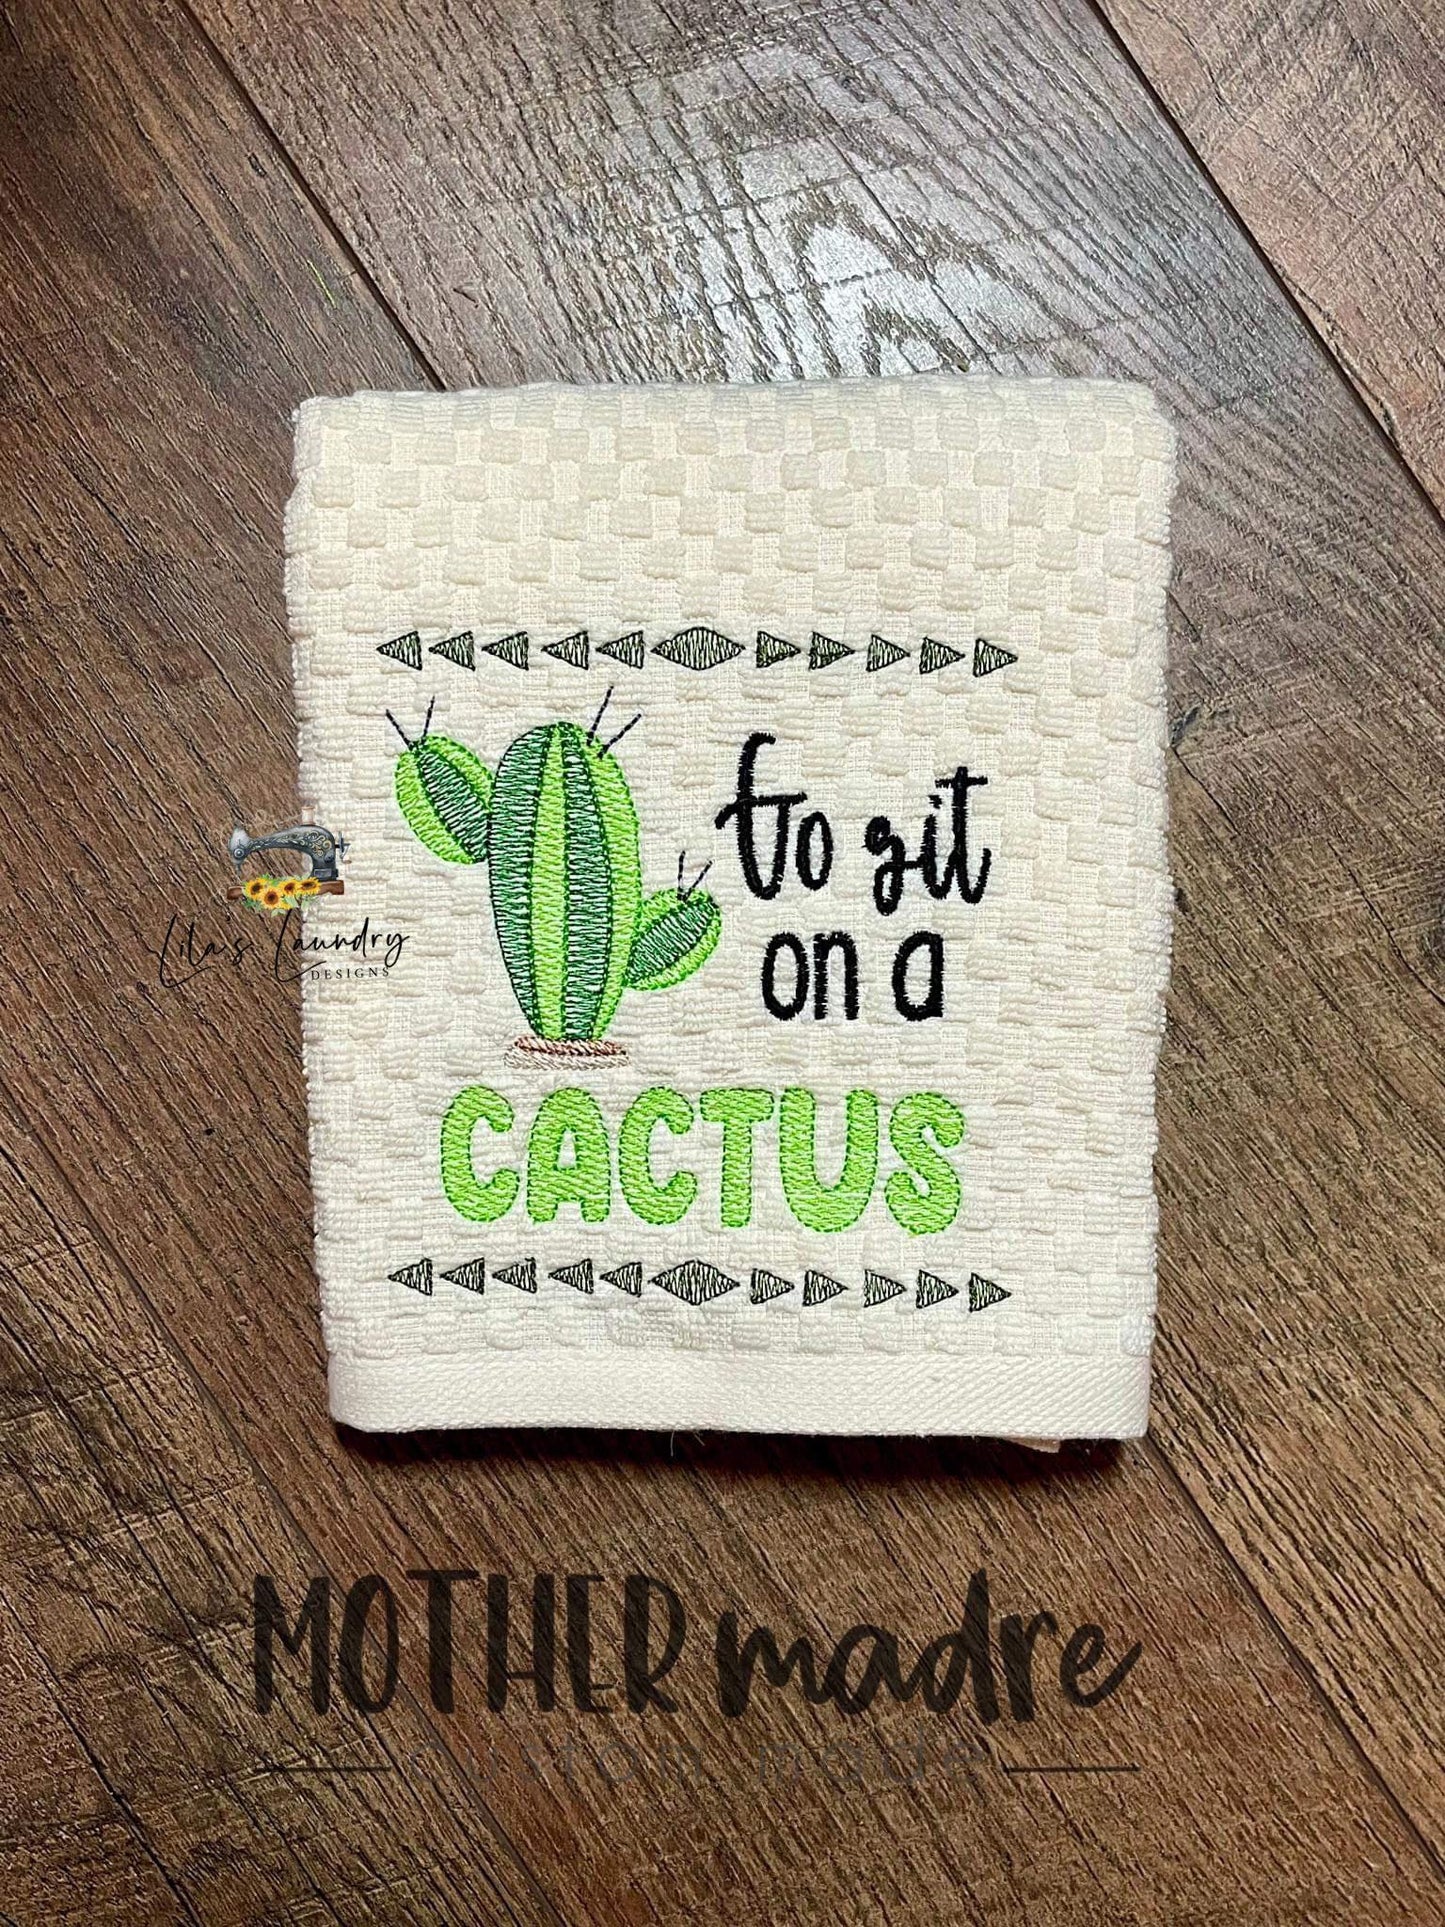 Go Sit on a Cactus - 4 sizes- Digital Embroidery Design